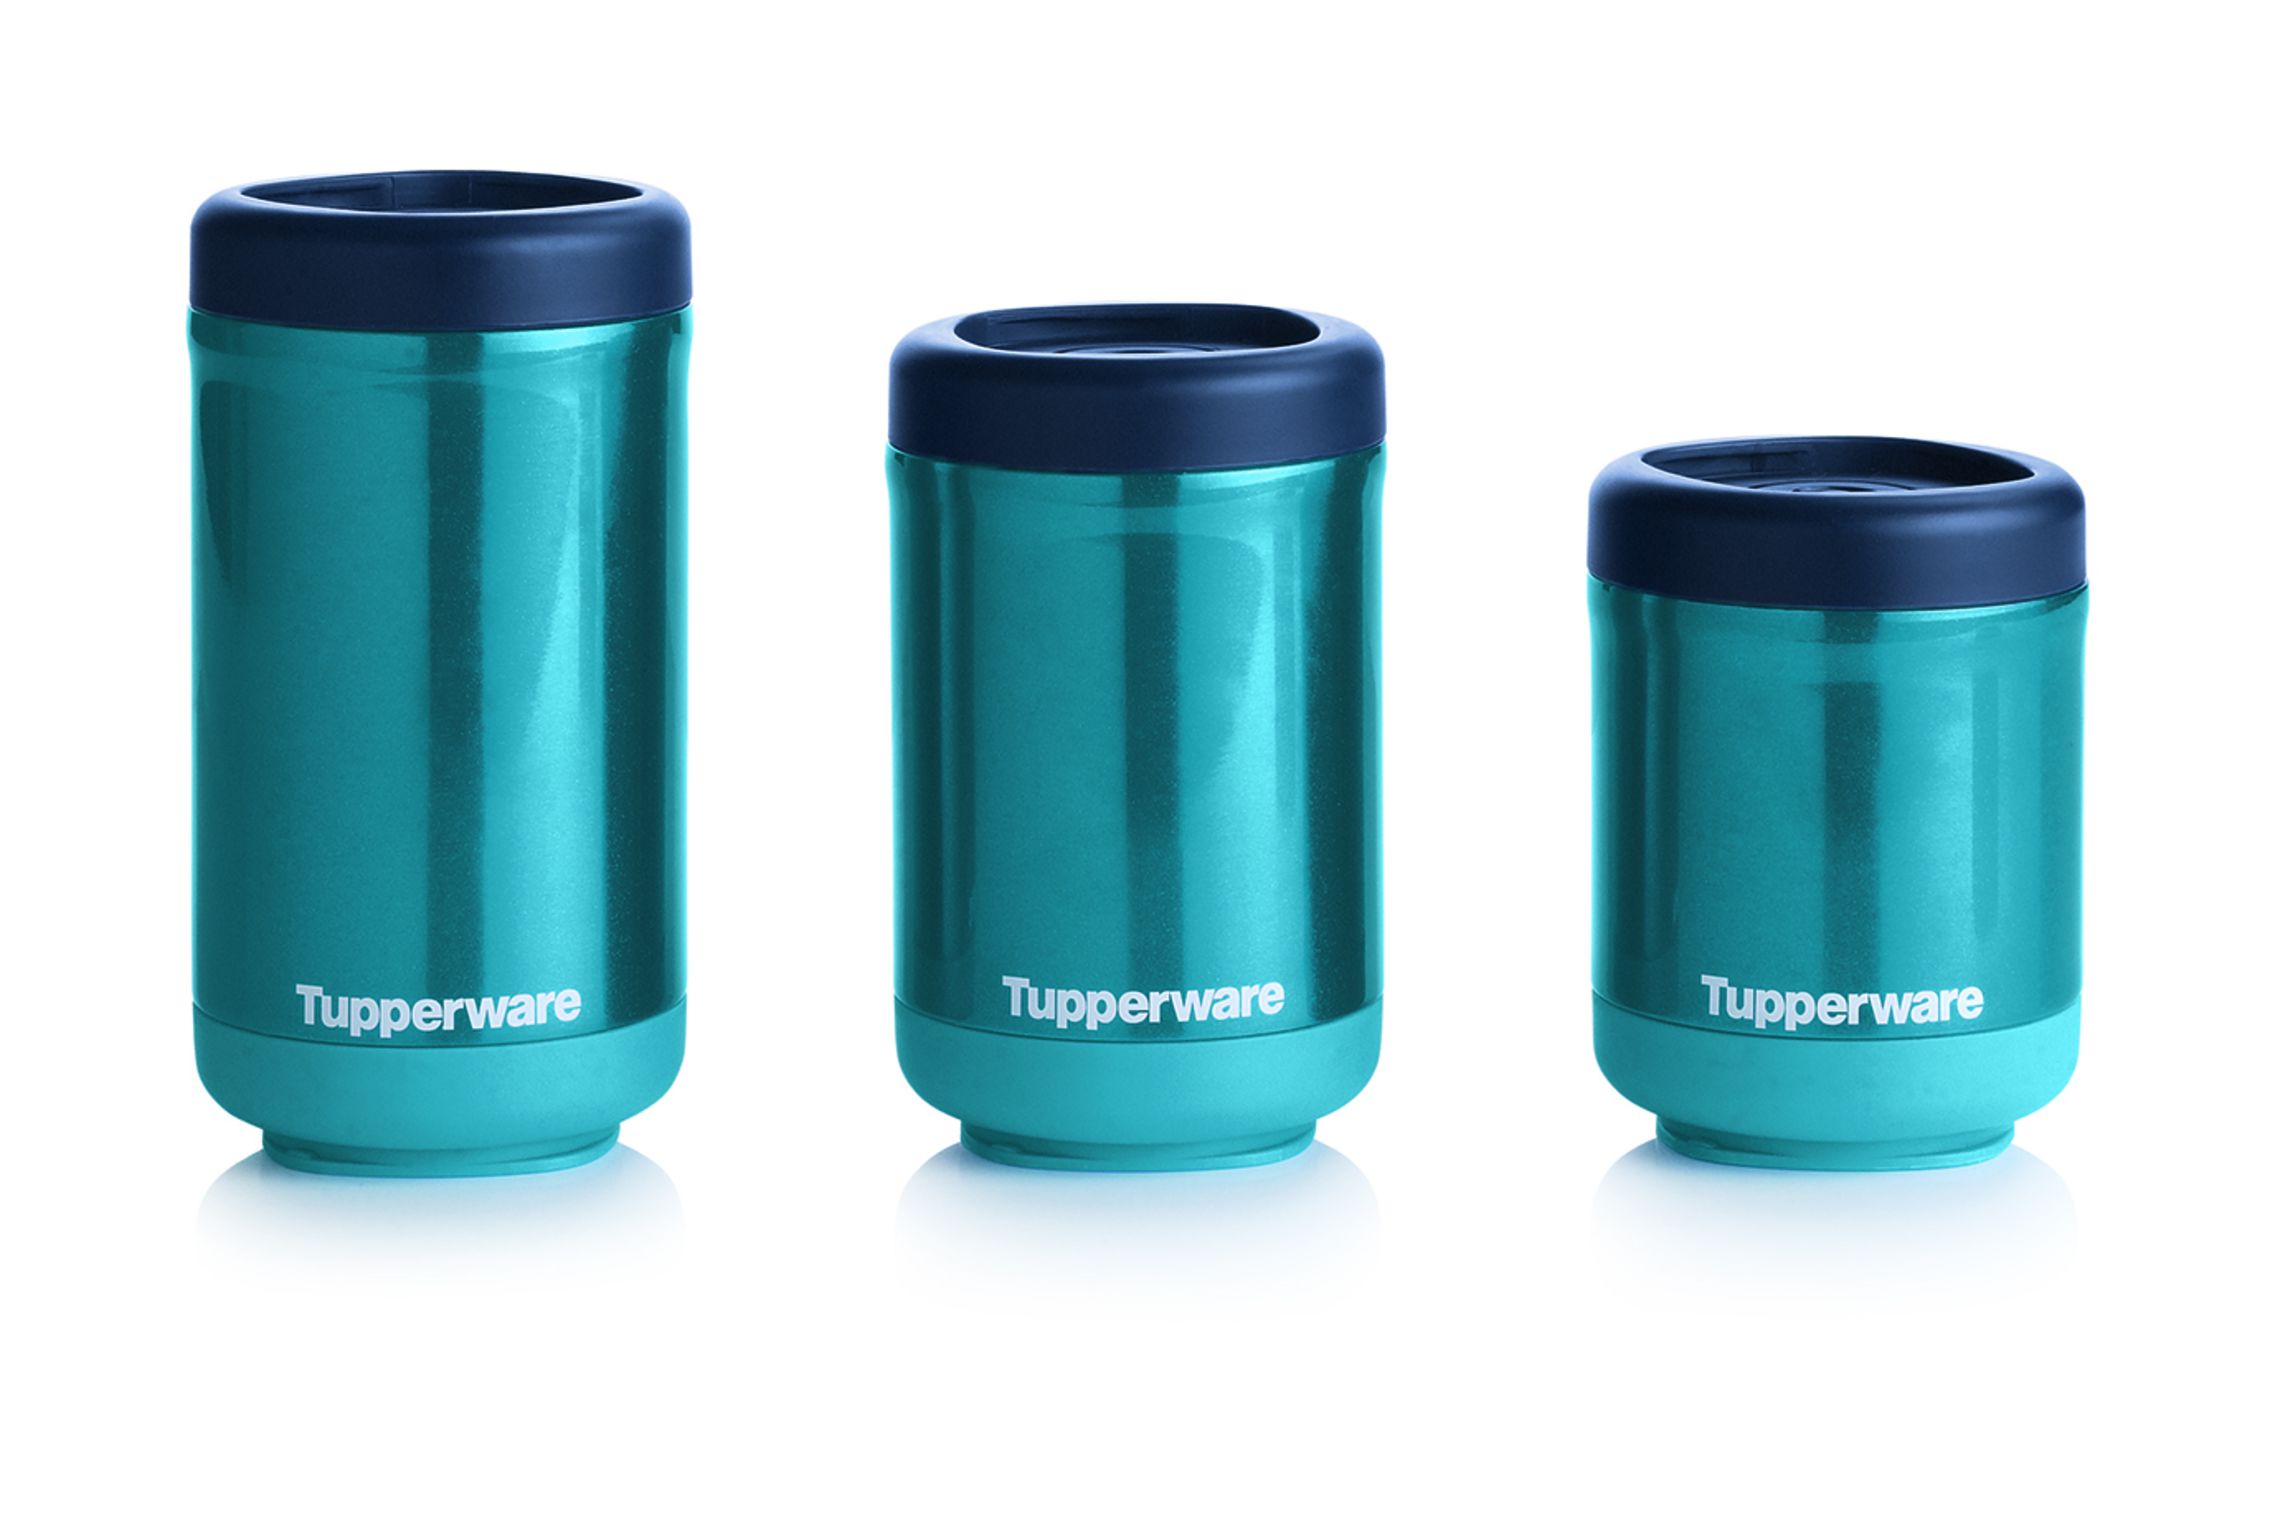 tupperware thermos hot flask